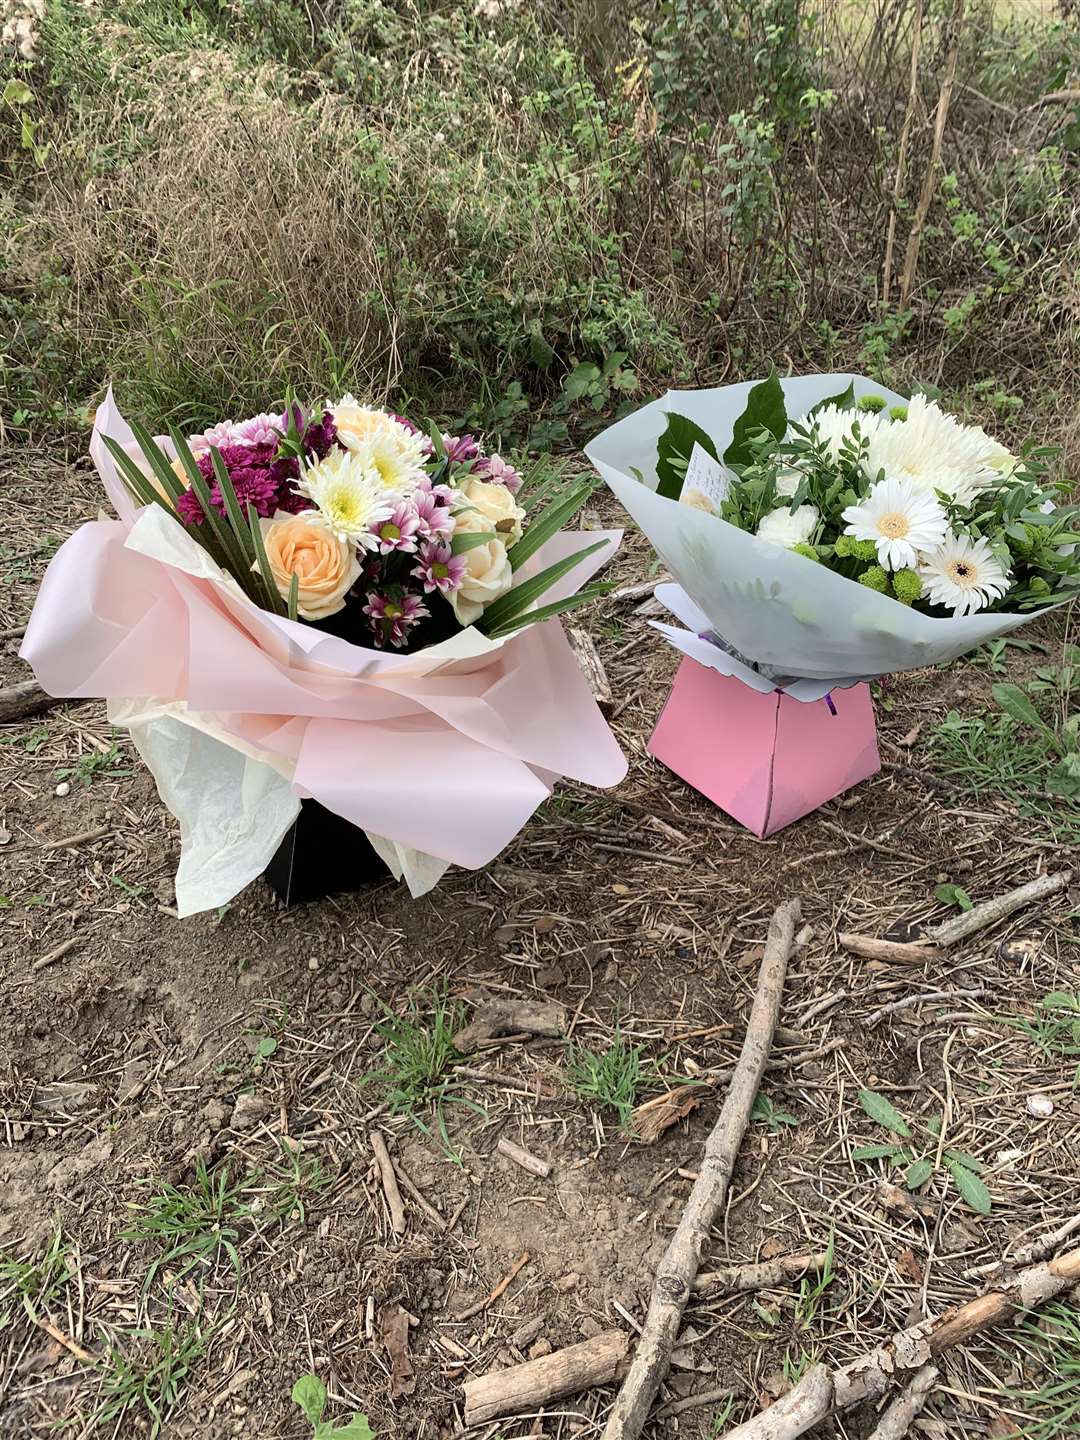 Tributes were left for the Tunstall pupil who died in woodlands in Bobbing